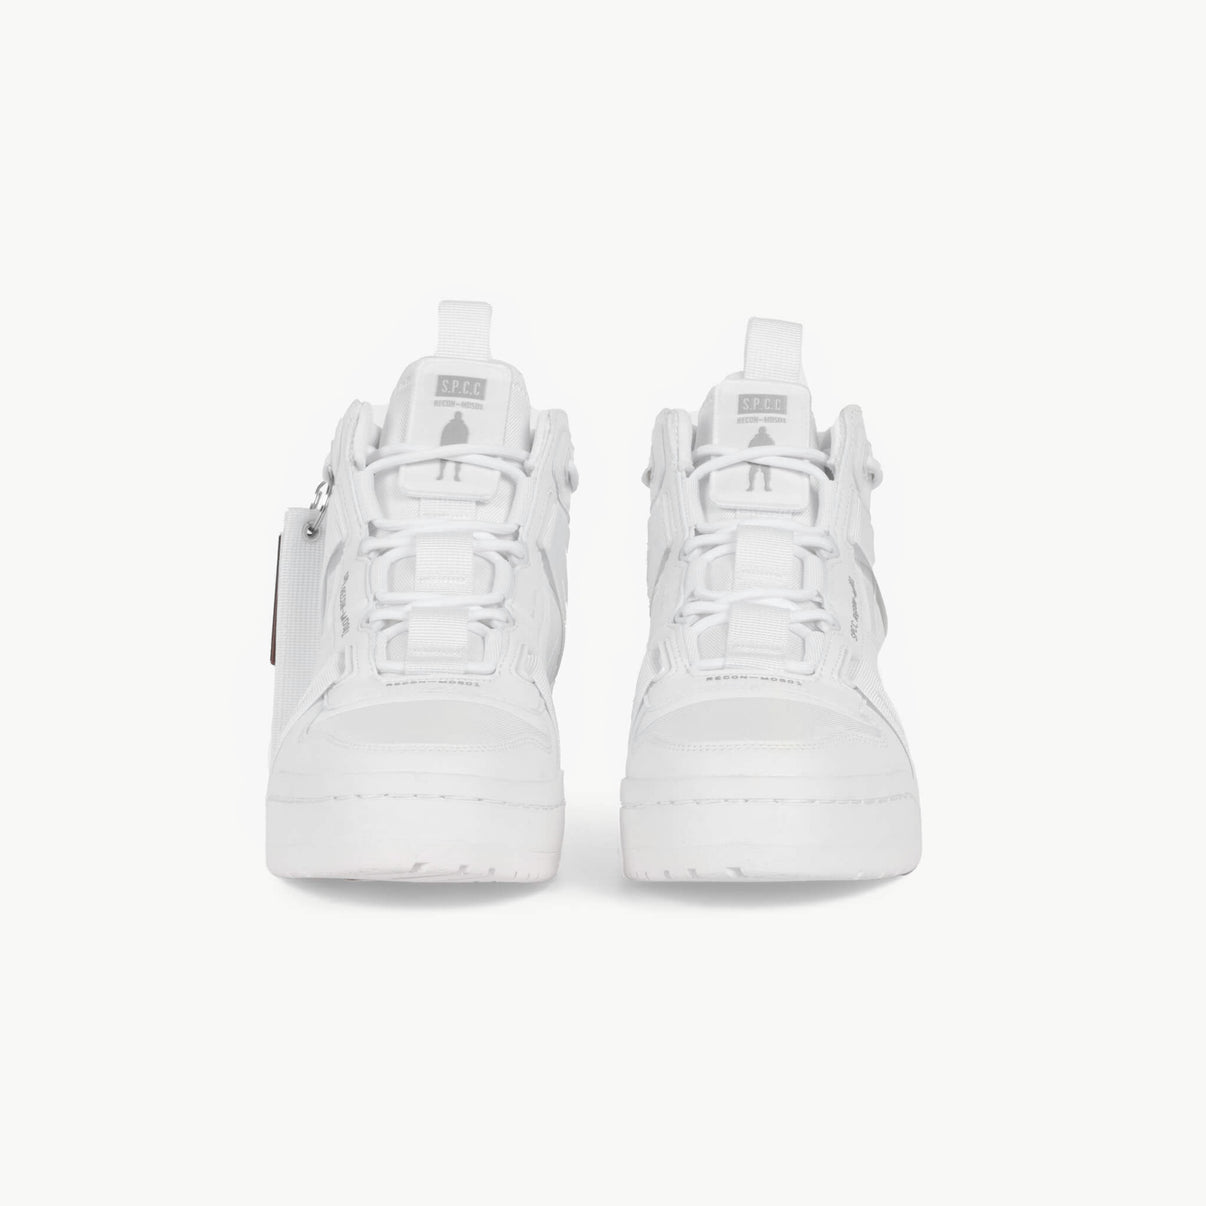 Recon MDS01 Hi Sneakers - White – S.P.C.C Official Store